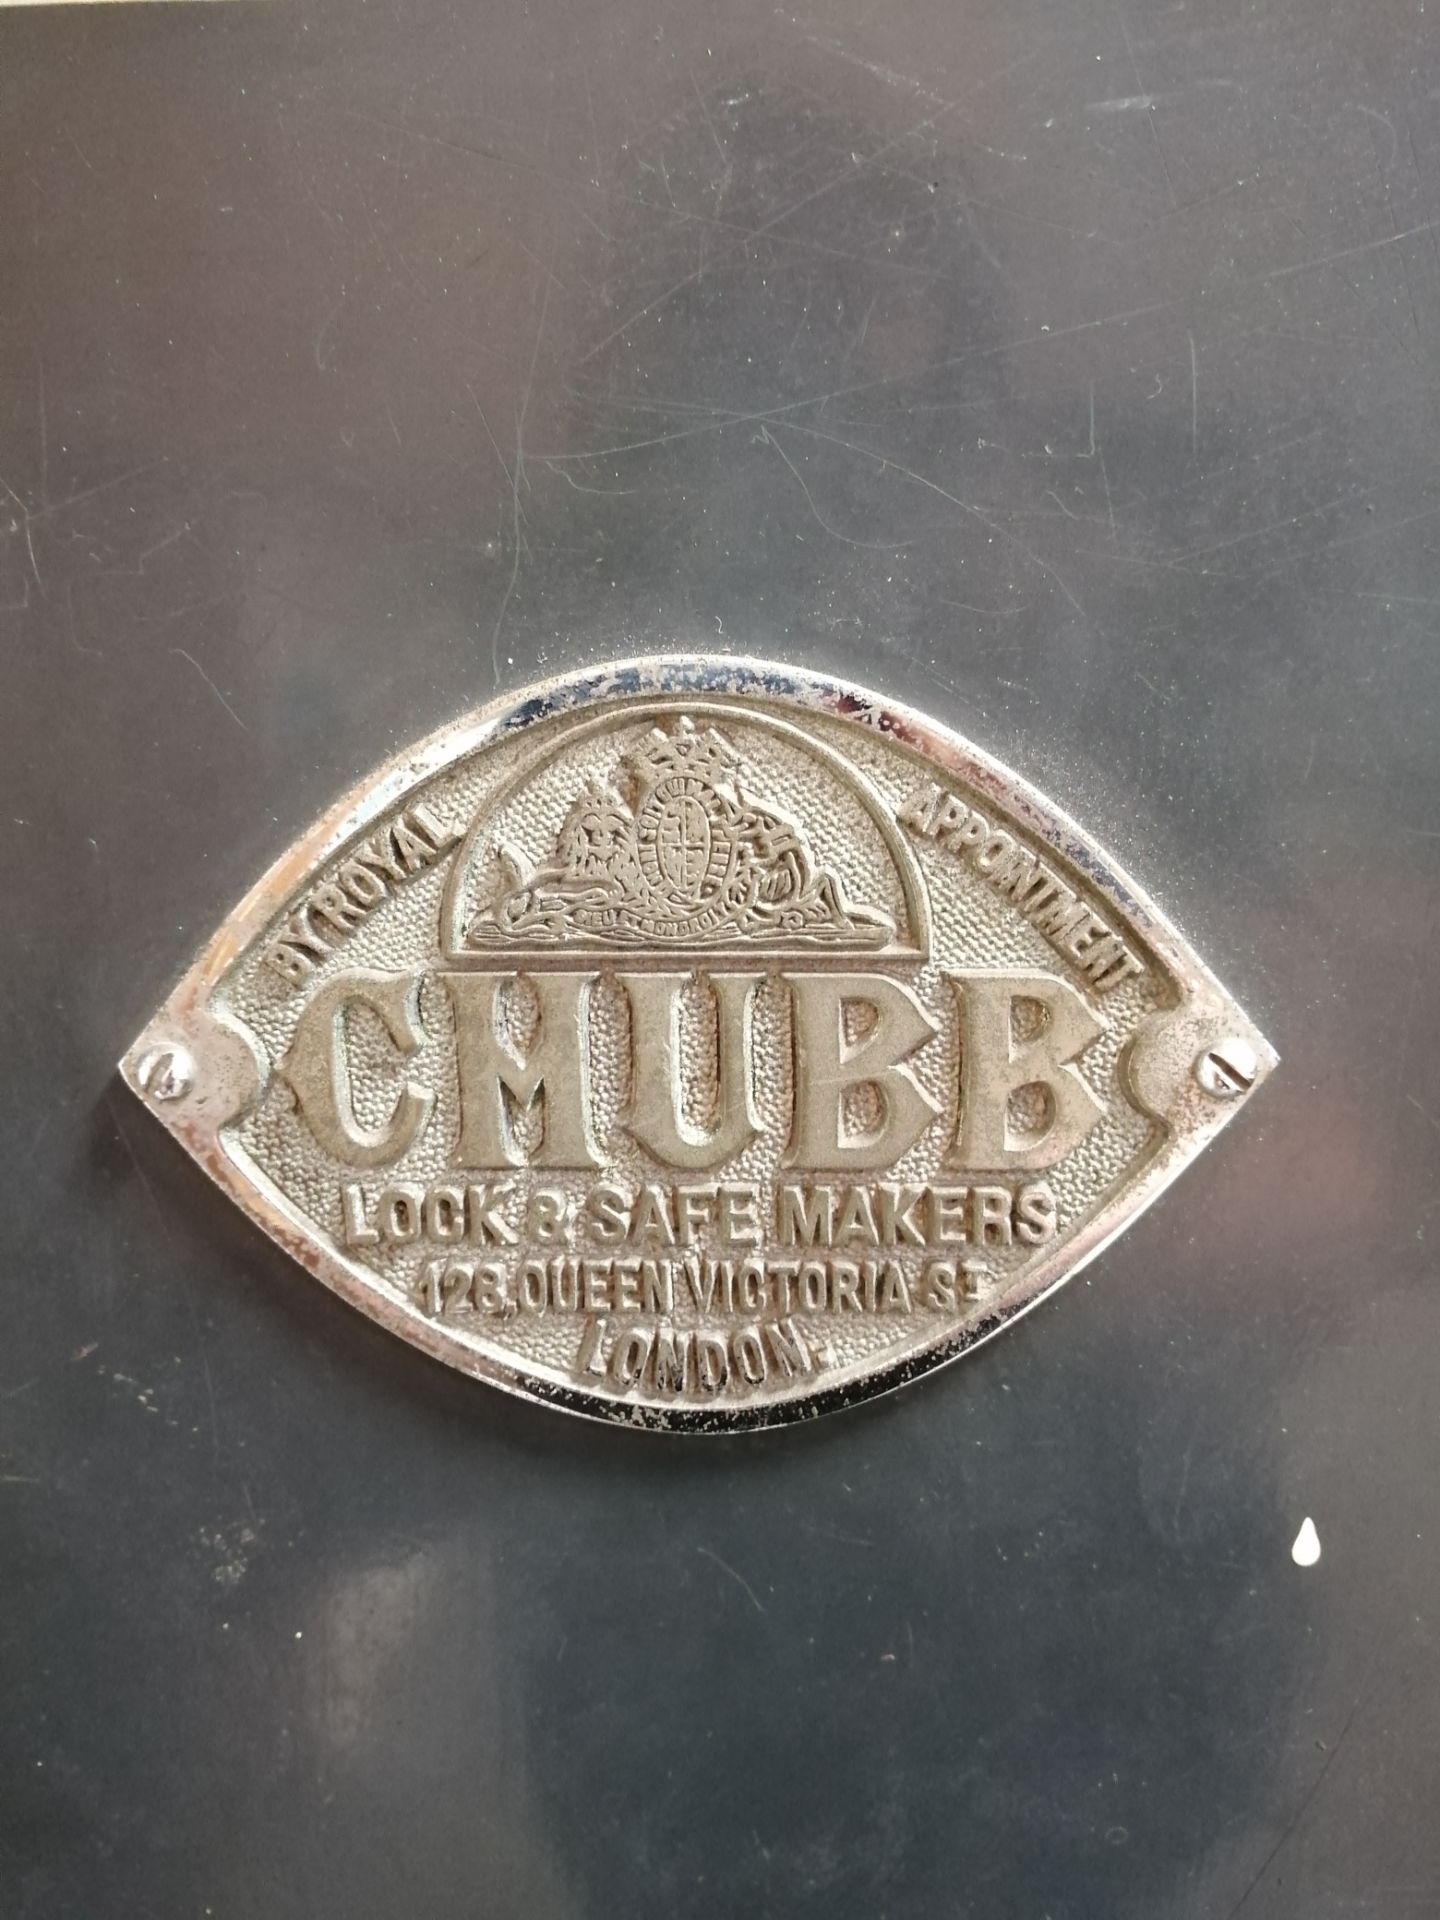 Chubb & Sons Safe - Image 3 of 4